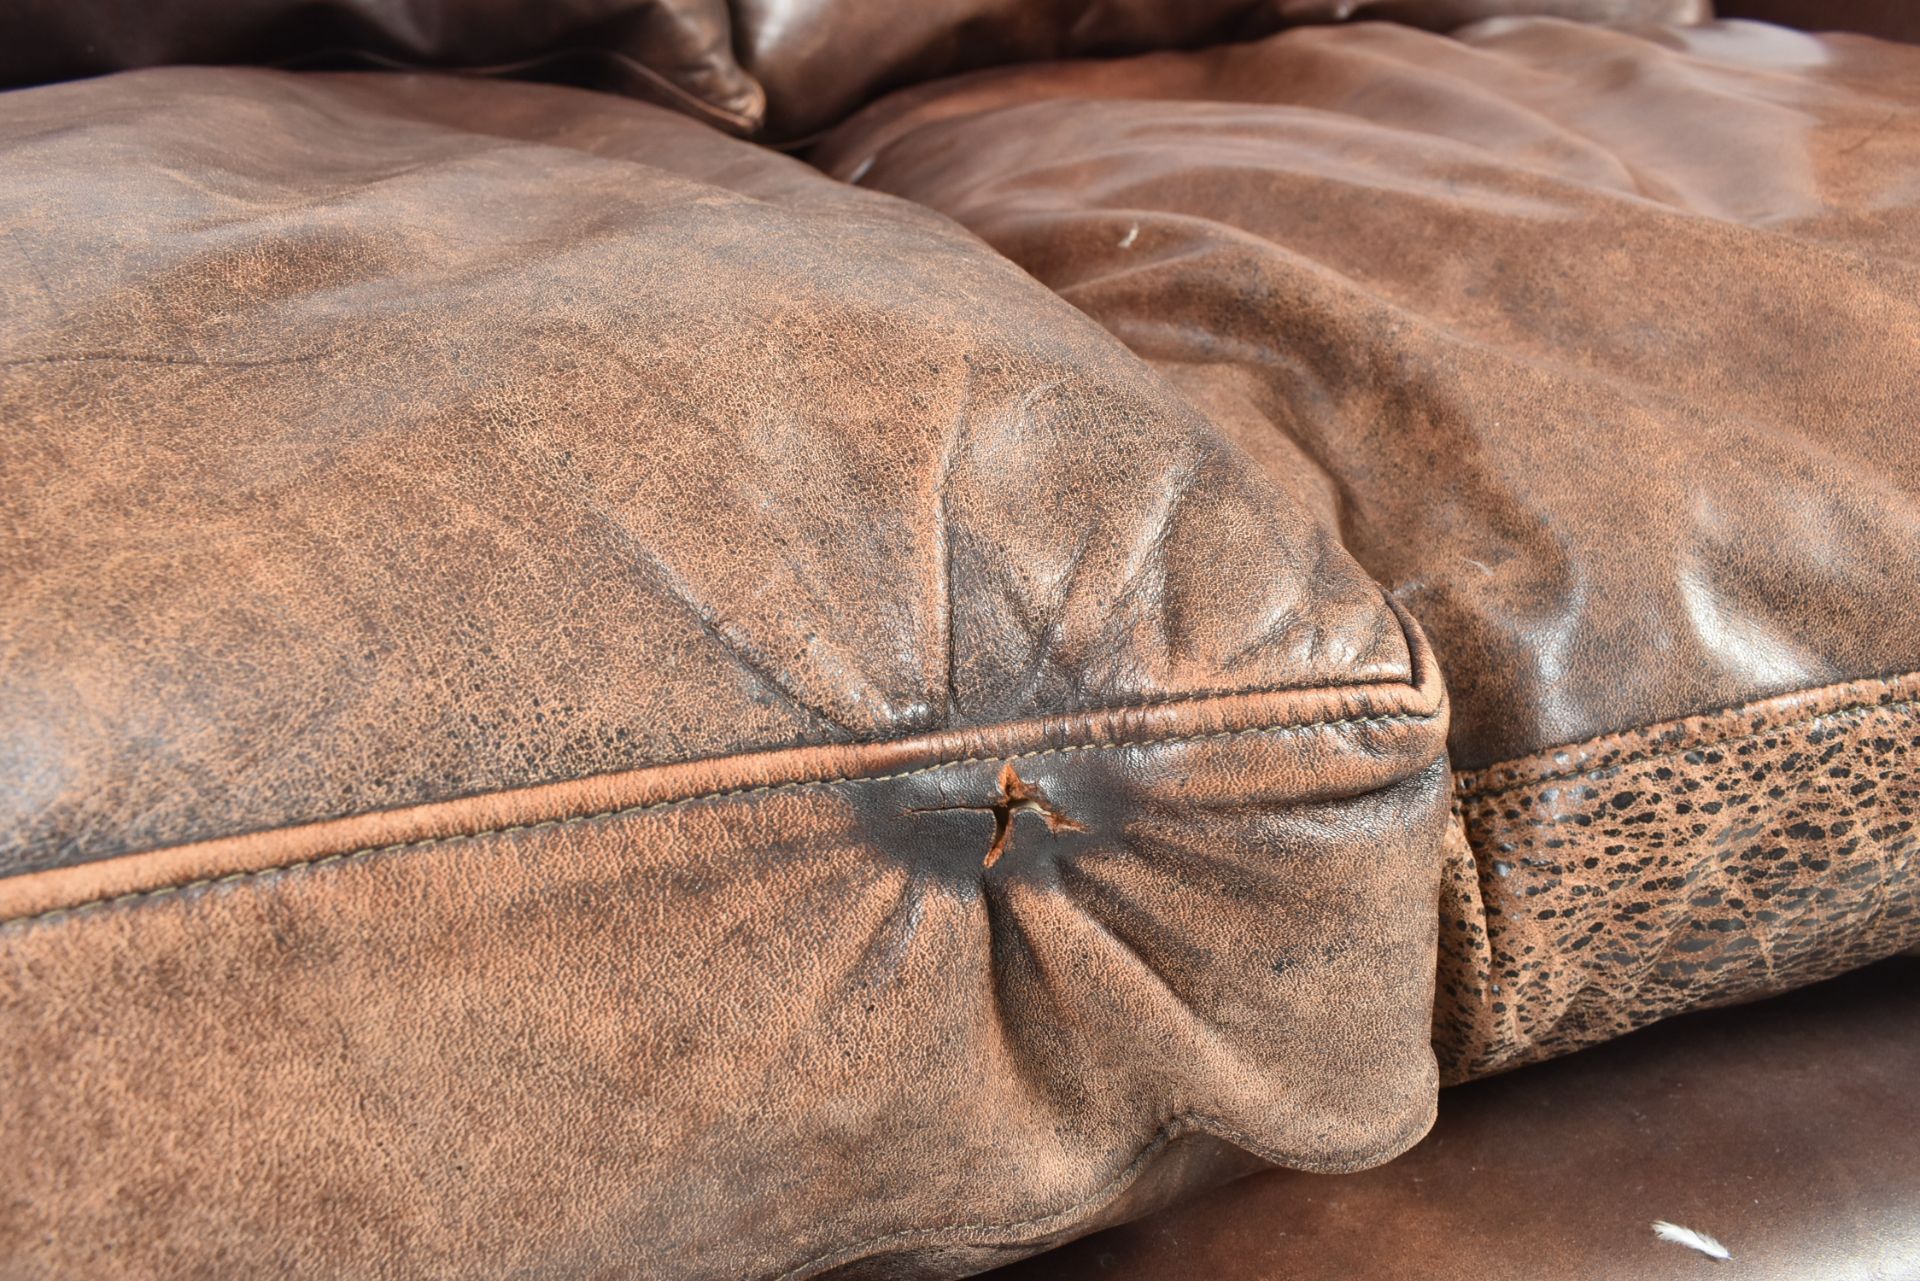 MODERN HIGH-END BRITISH DESIGN TWO SEATER LEATHER SOFA - Image 3 of 7